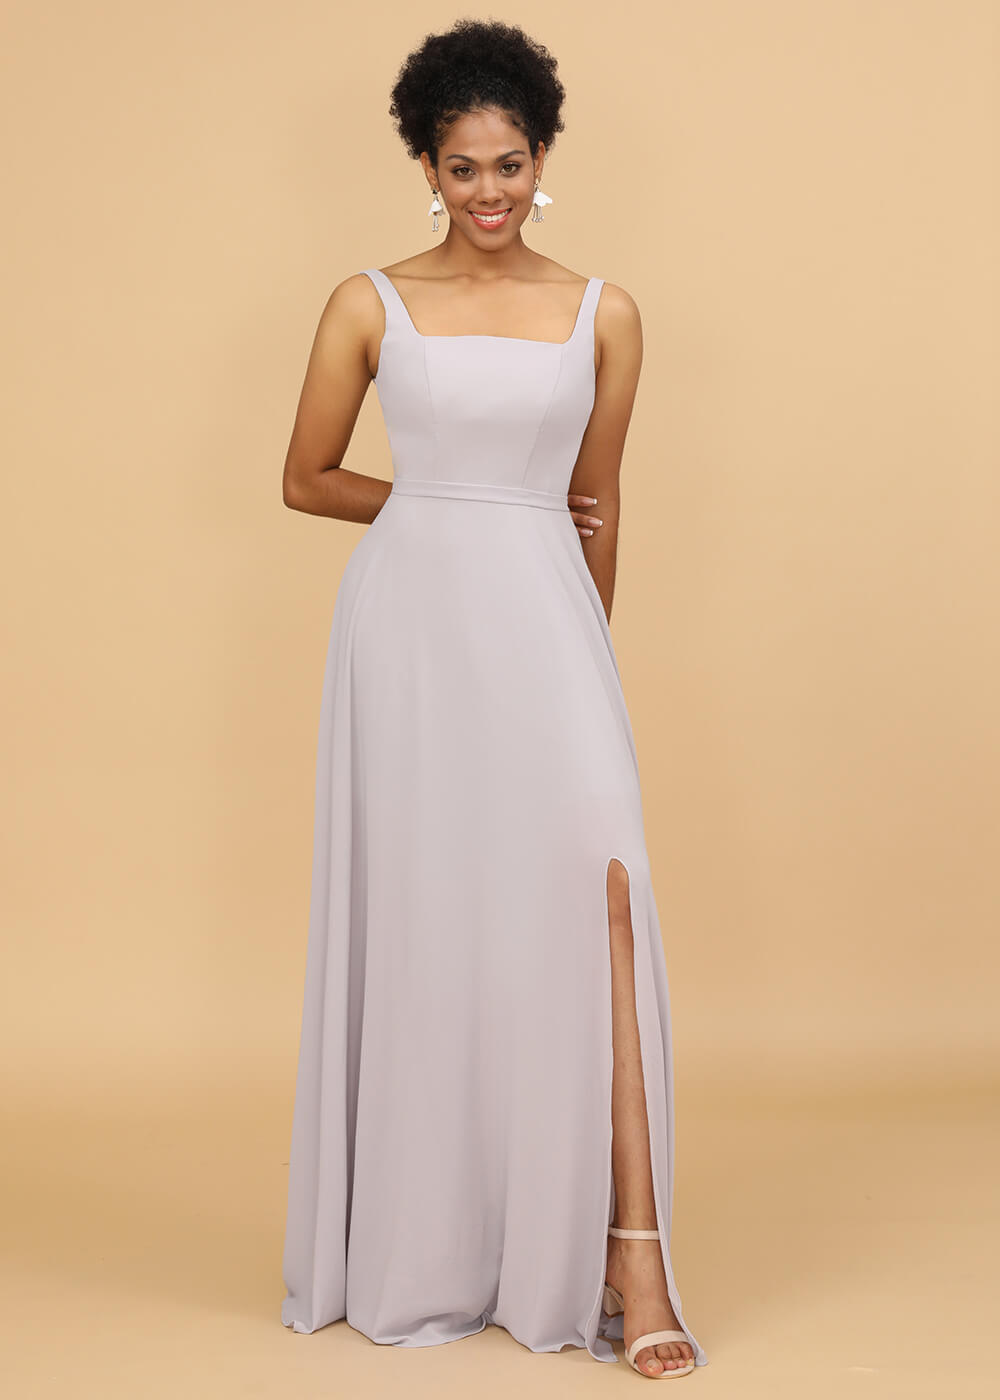 Square Neck Scoop Back A-line Chiffon Bridesmaid Dress with Slit